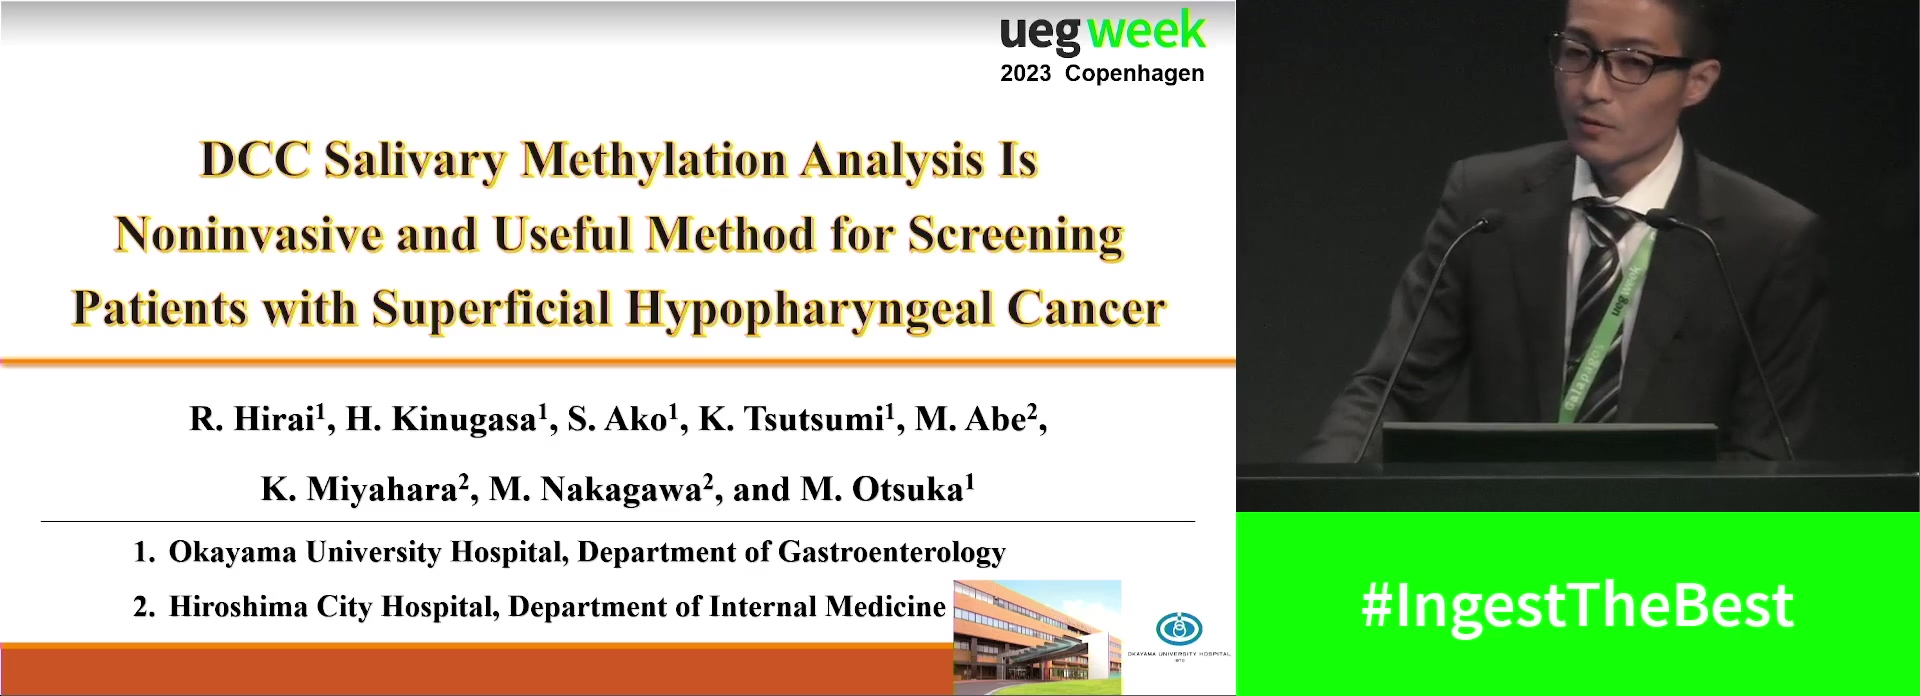 DCC SALIVARY METHYLATION ANALYSIS IS NONINVASIVE AND USEFUL METHOD FOR SCREENING PATIENTS WITH SUPERFICIAL HYPOPHARYNGEAL CANCER